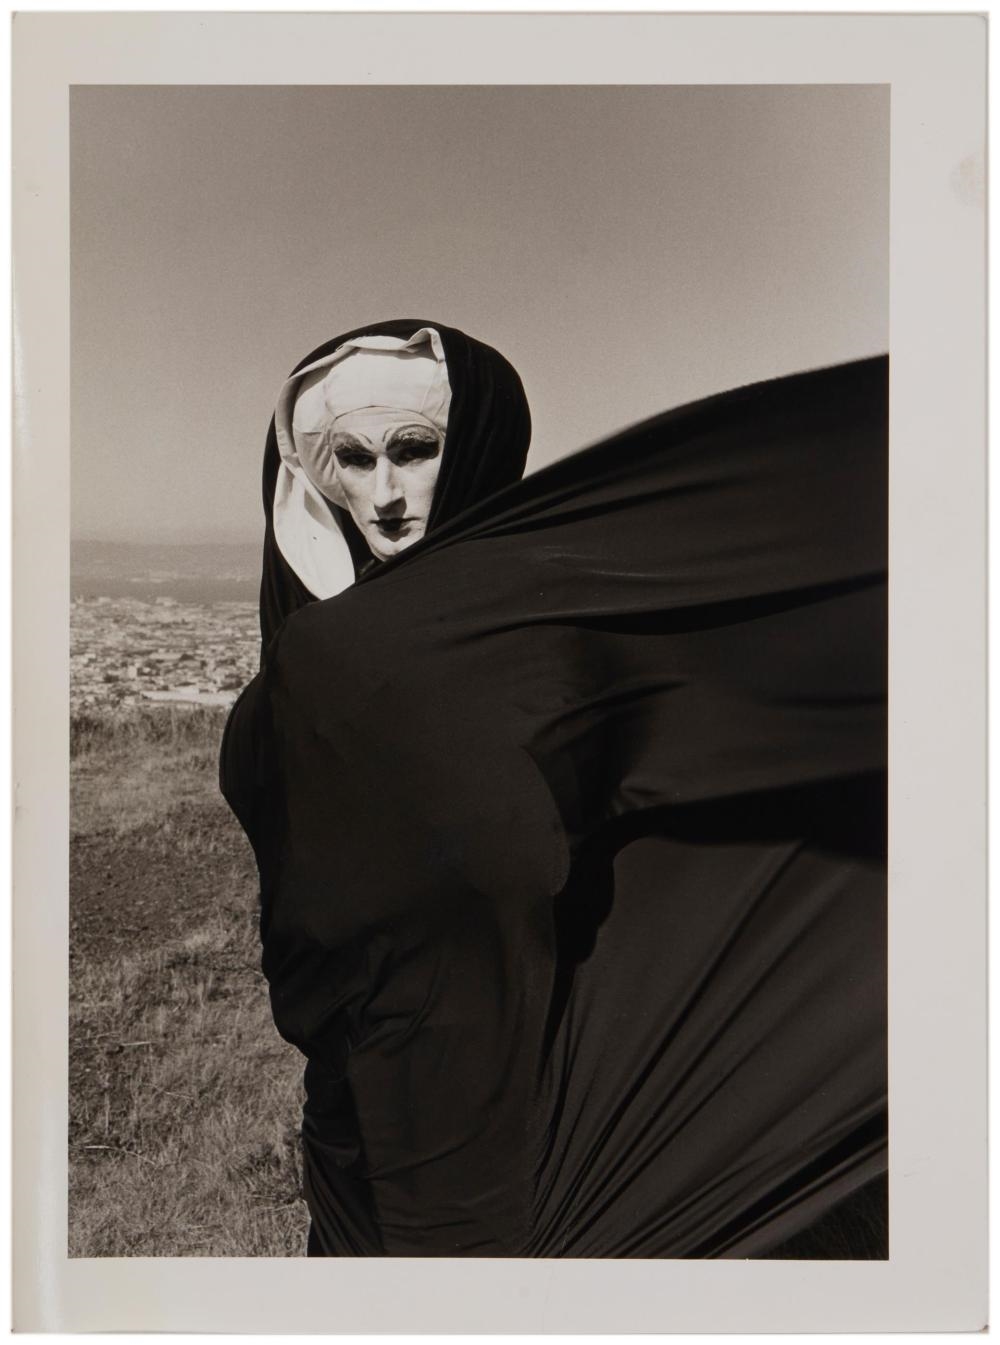 Artwork by Jean-Baptiste Carhaix, Carhaix, Sisters of Perpetual Indulgence, San Francisco, Made of Black and white photographs on paper